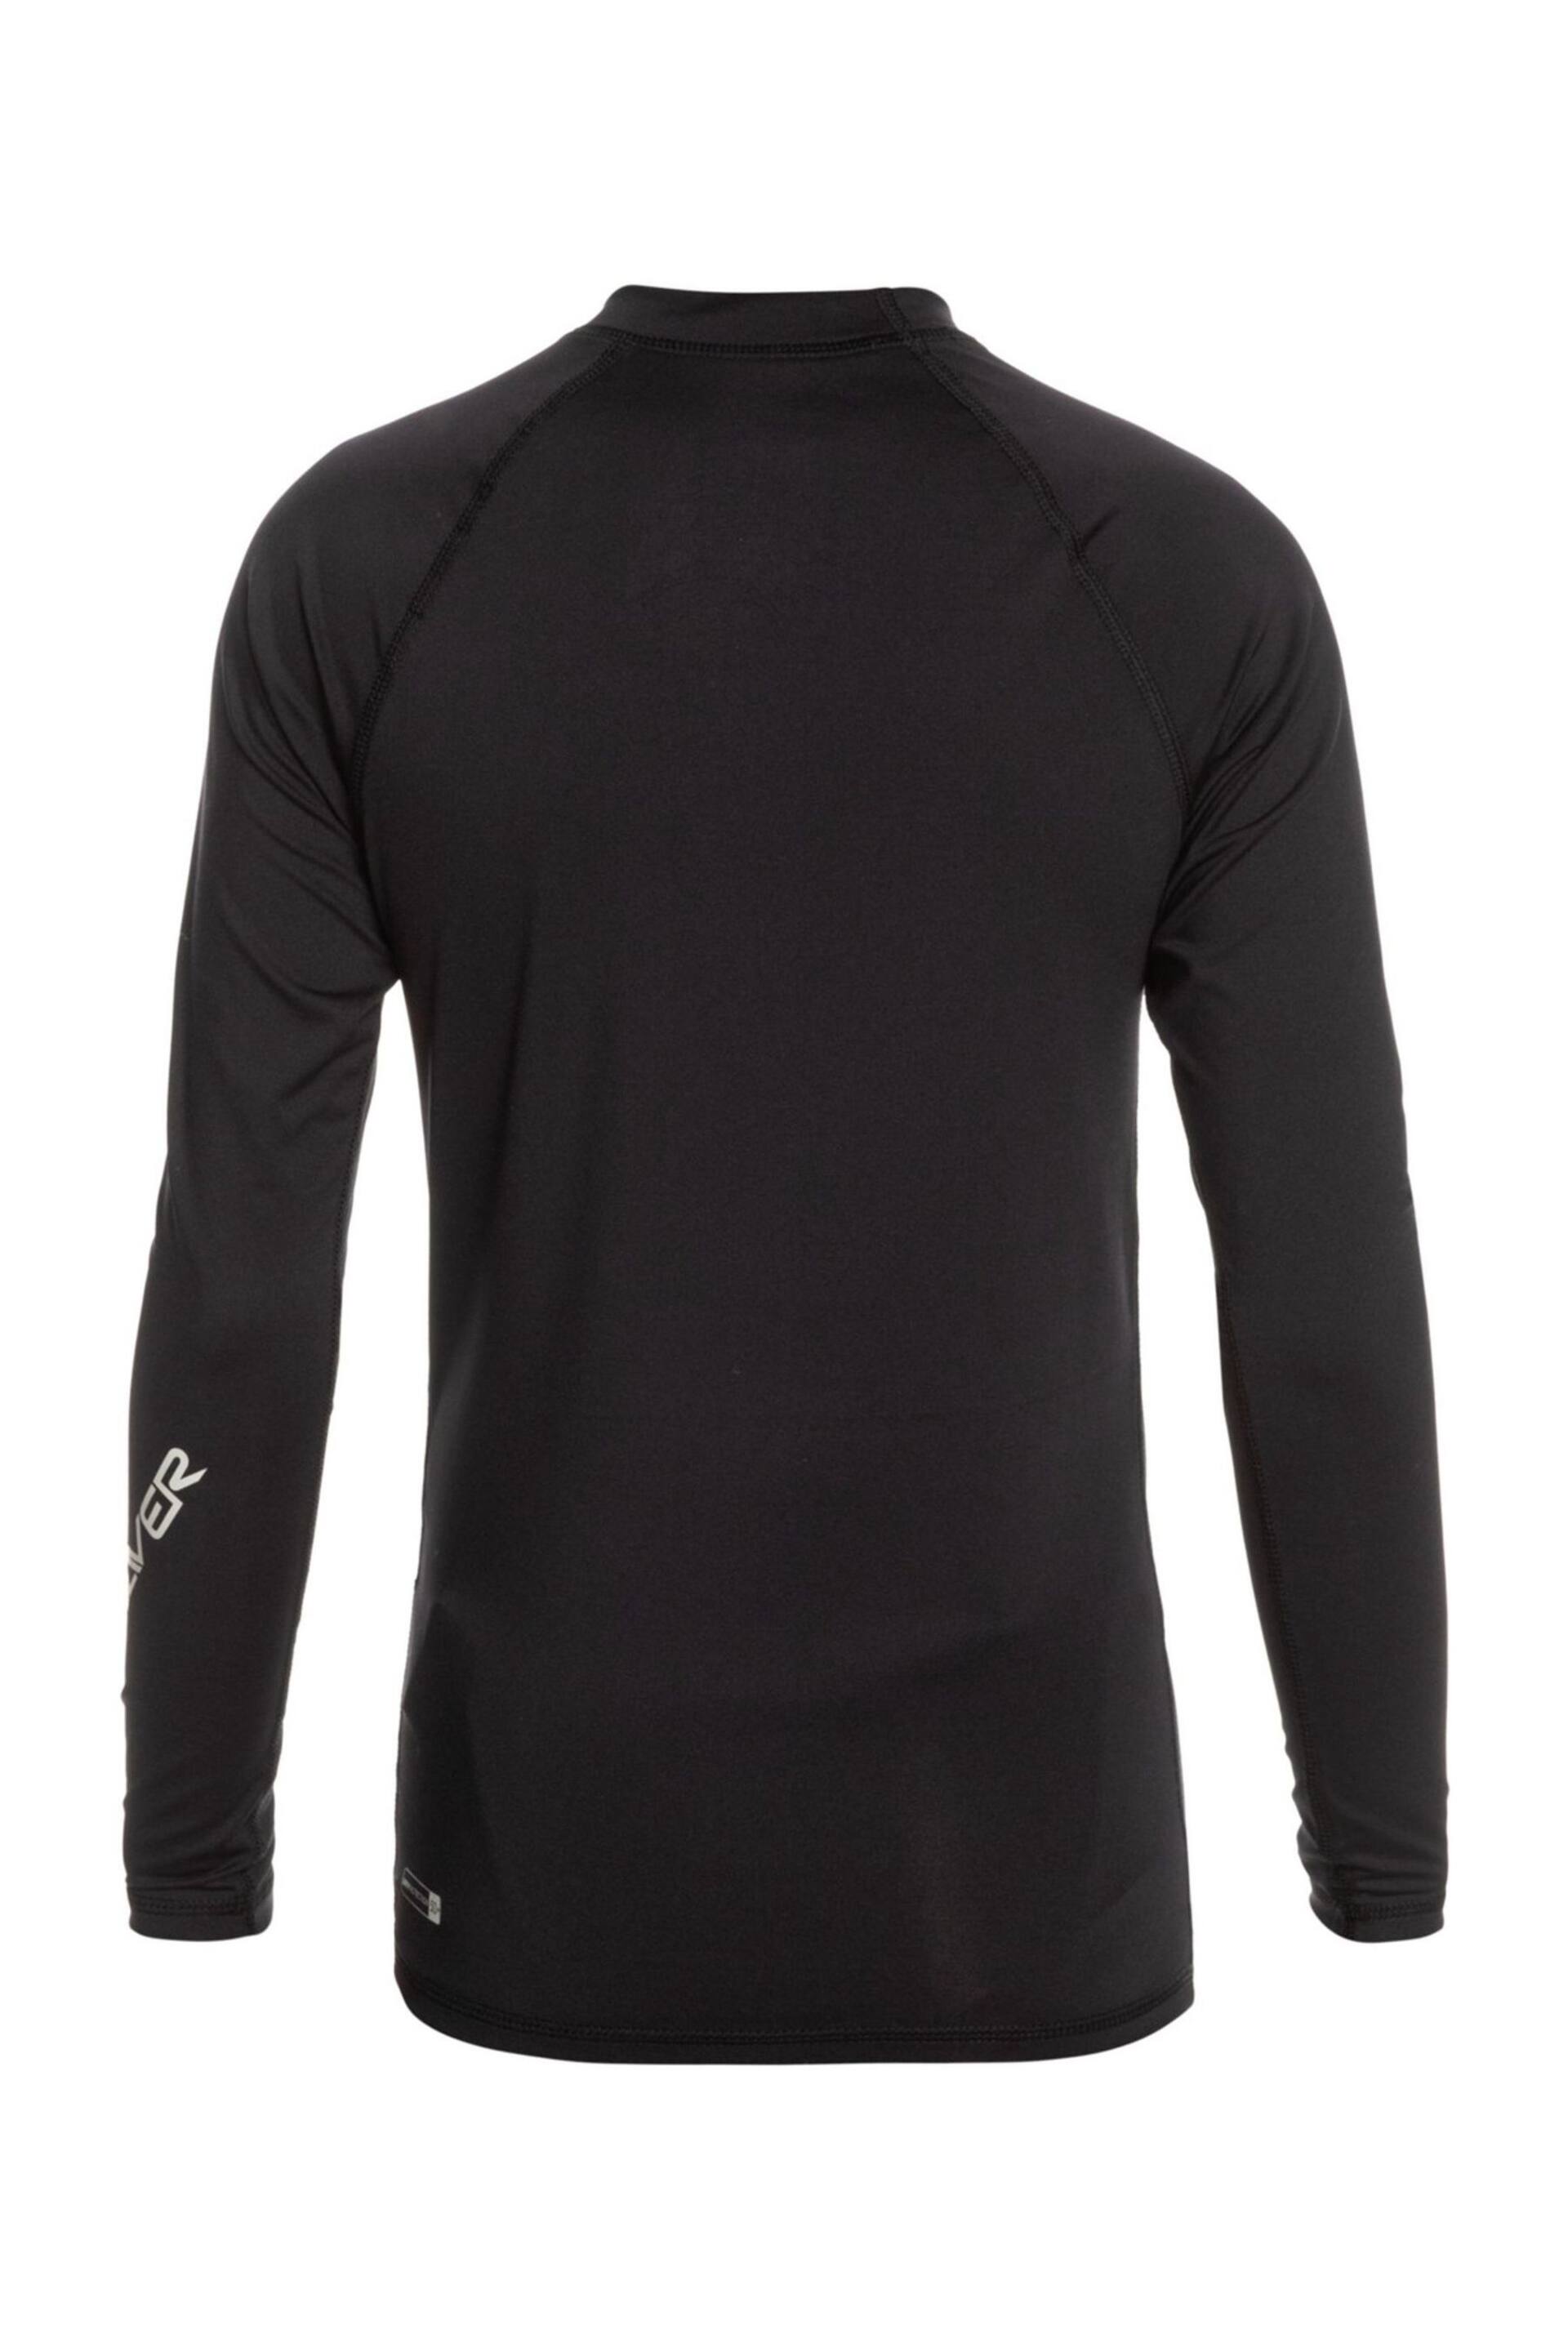 Quiksilver All Time Long Sleeves Rash Vest - Image 2 of 2